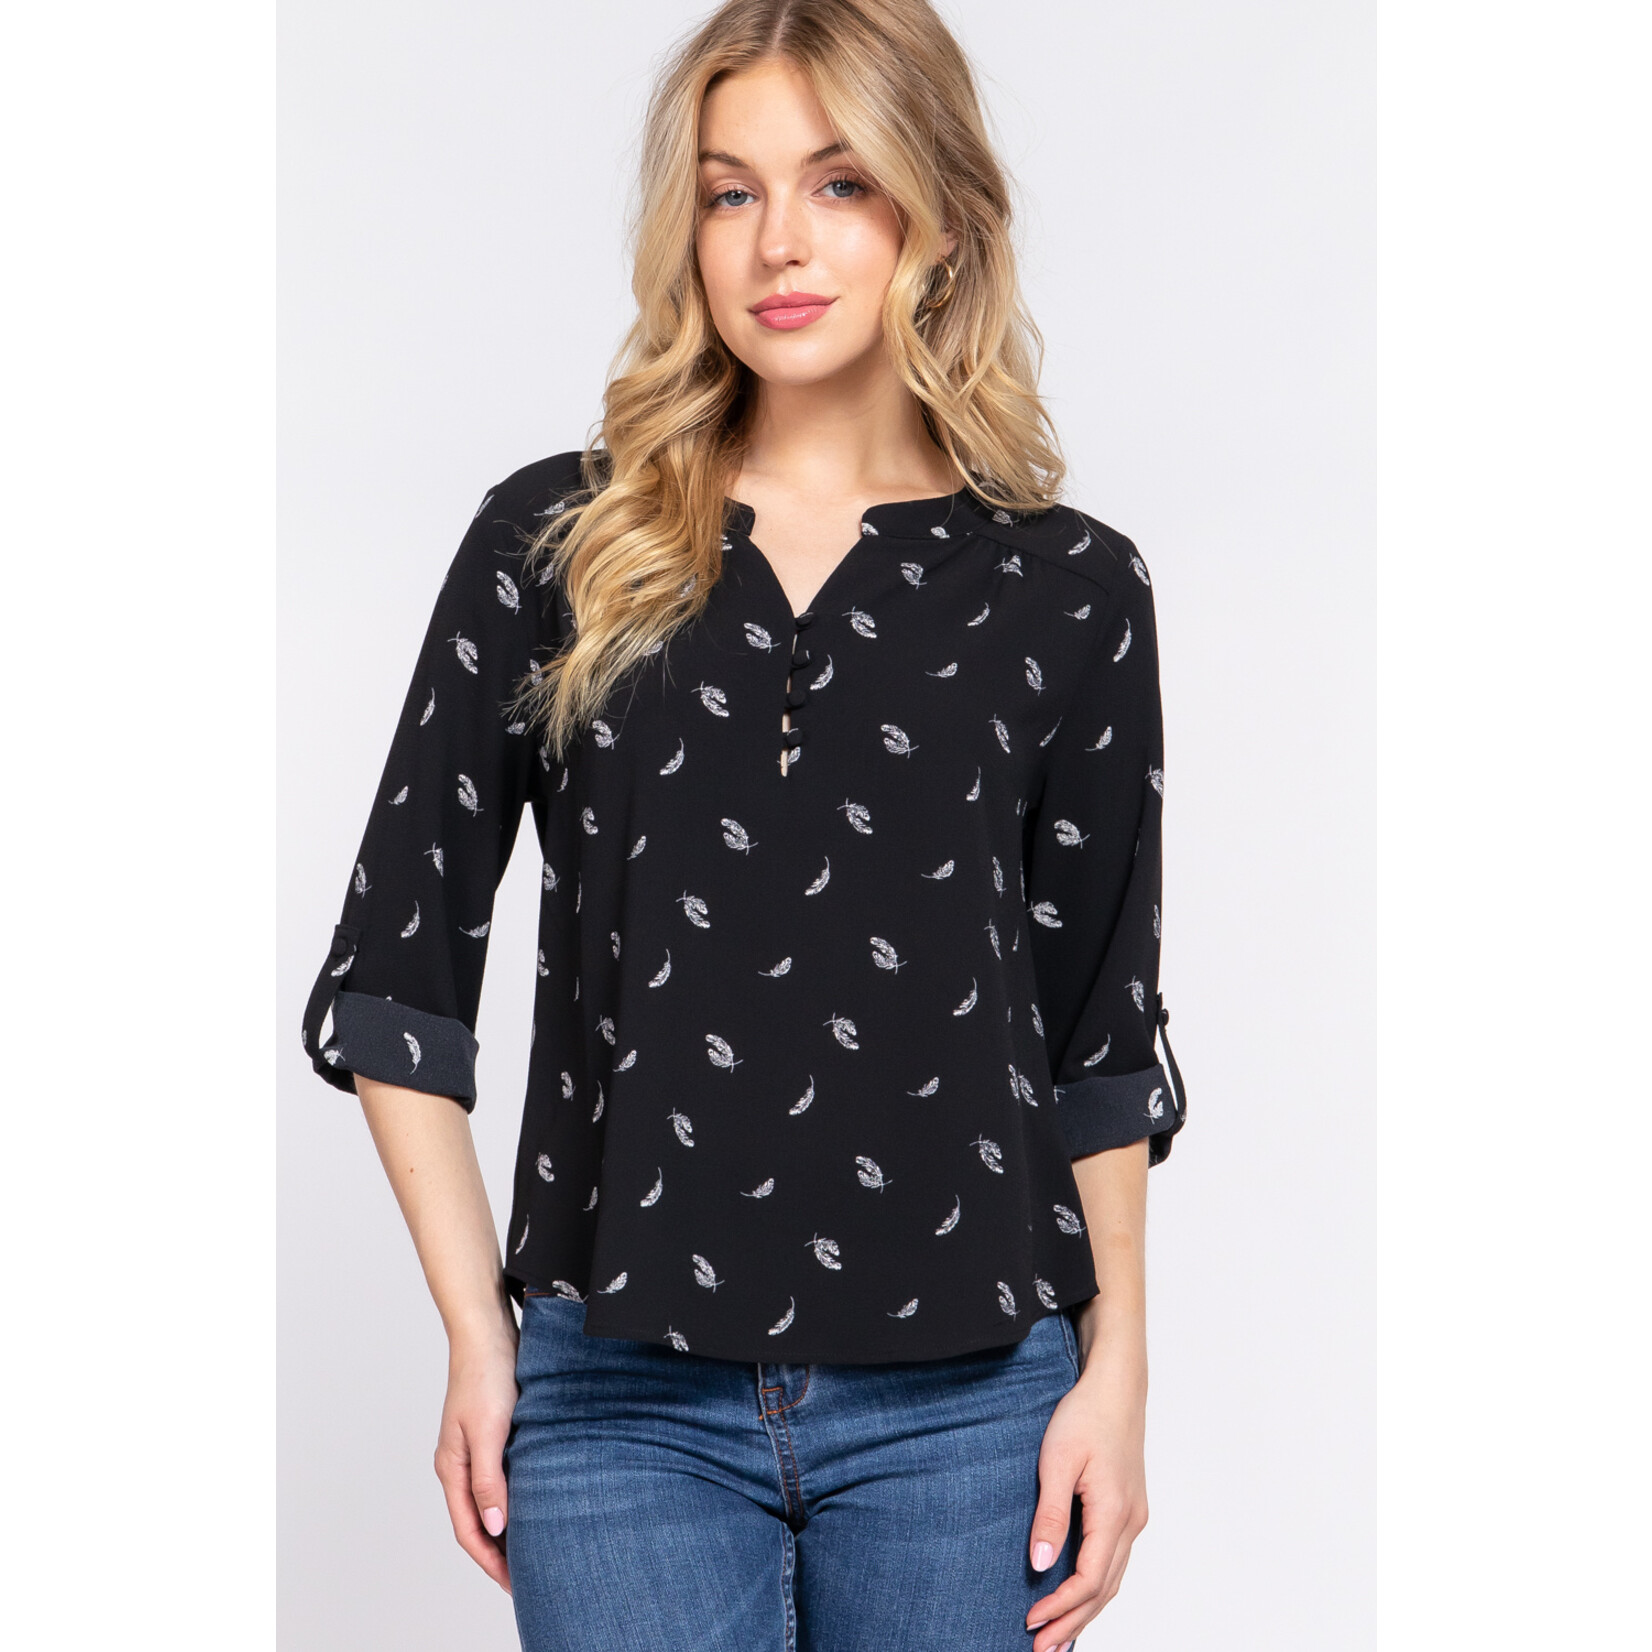 ACTIVE USA, INC. Active USA - Women's 3/4 Sleeve Printed Woven Blouse - T13657